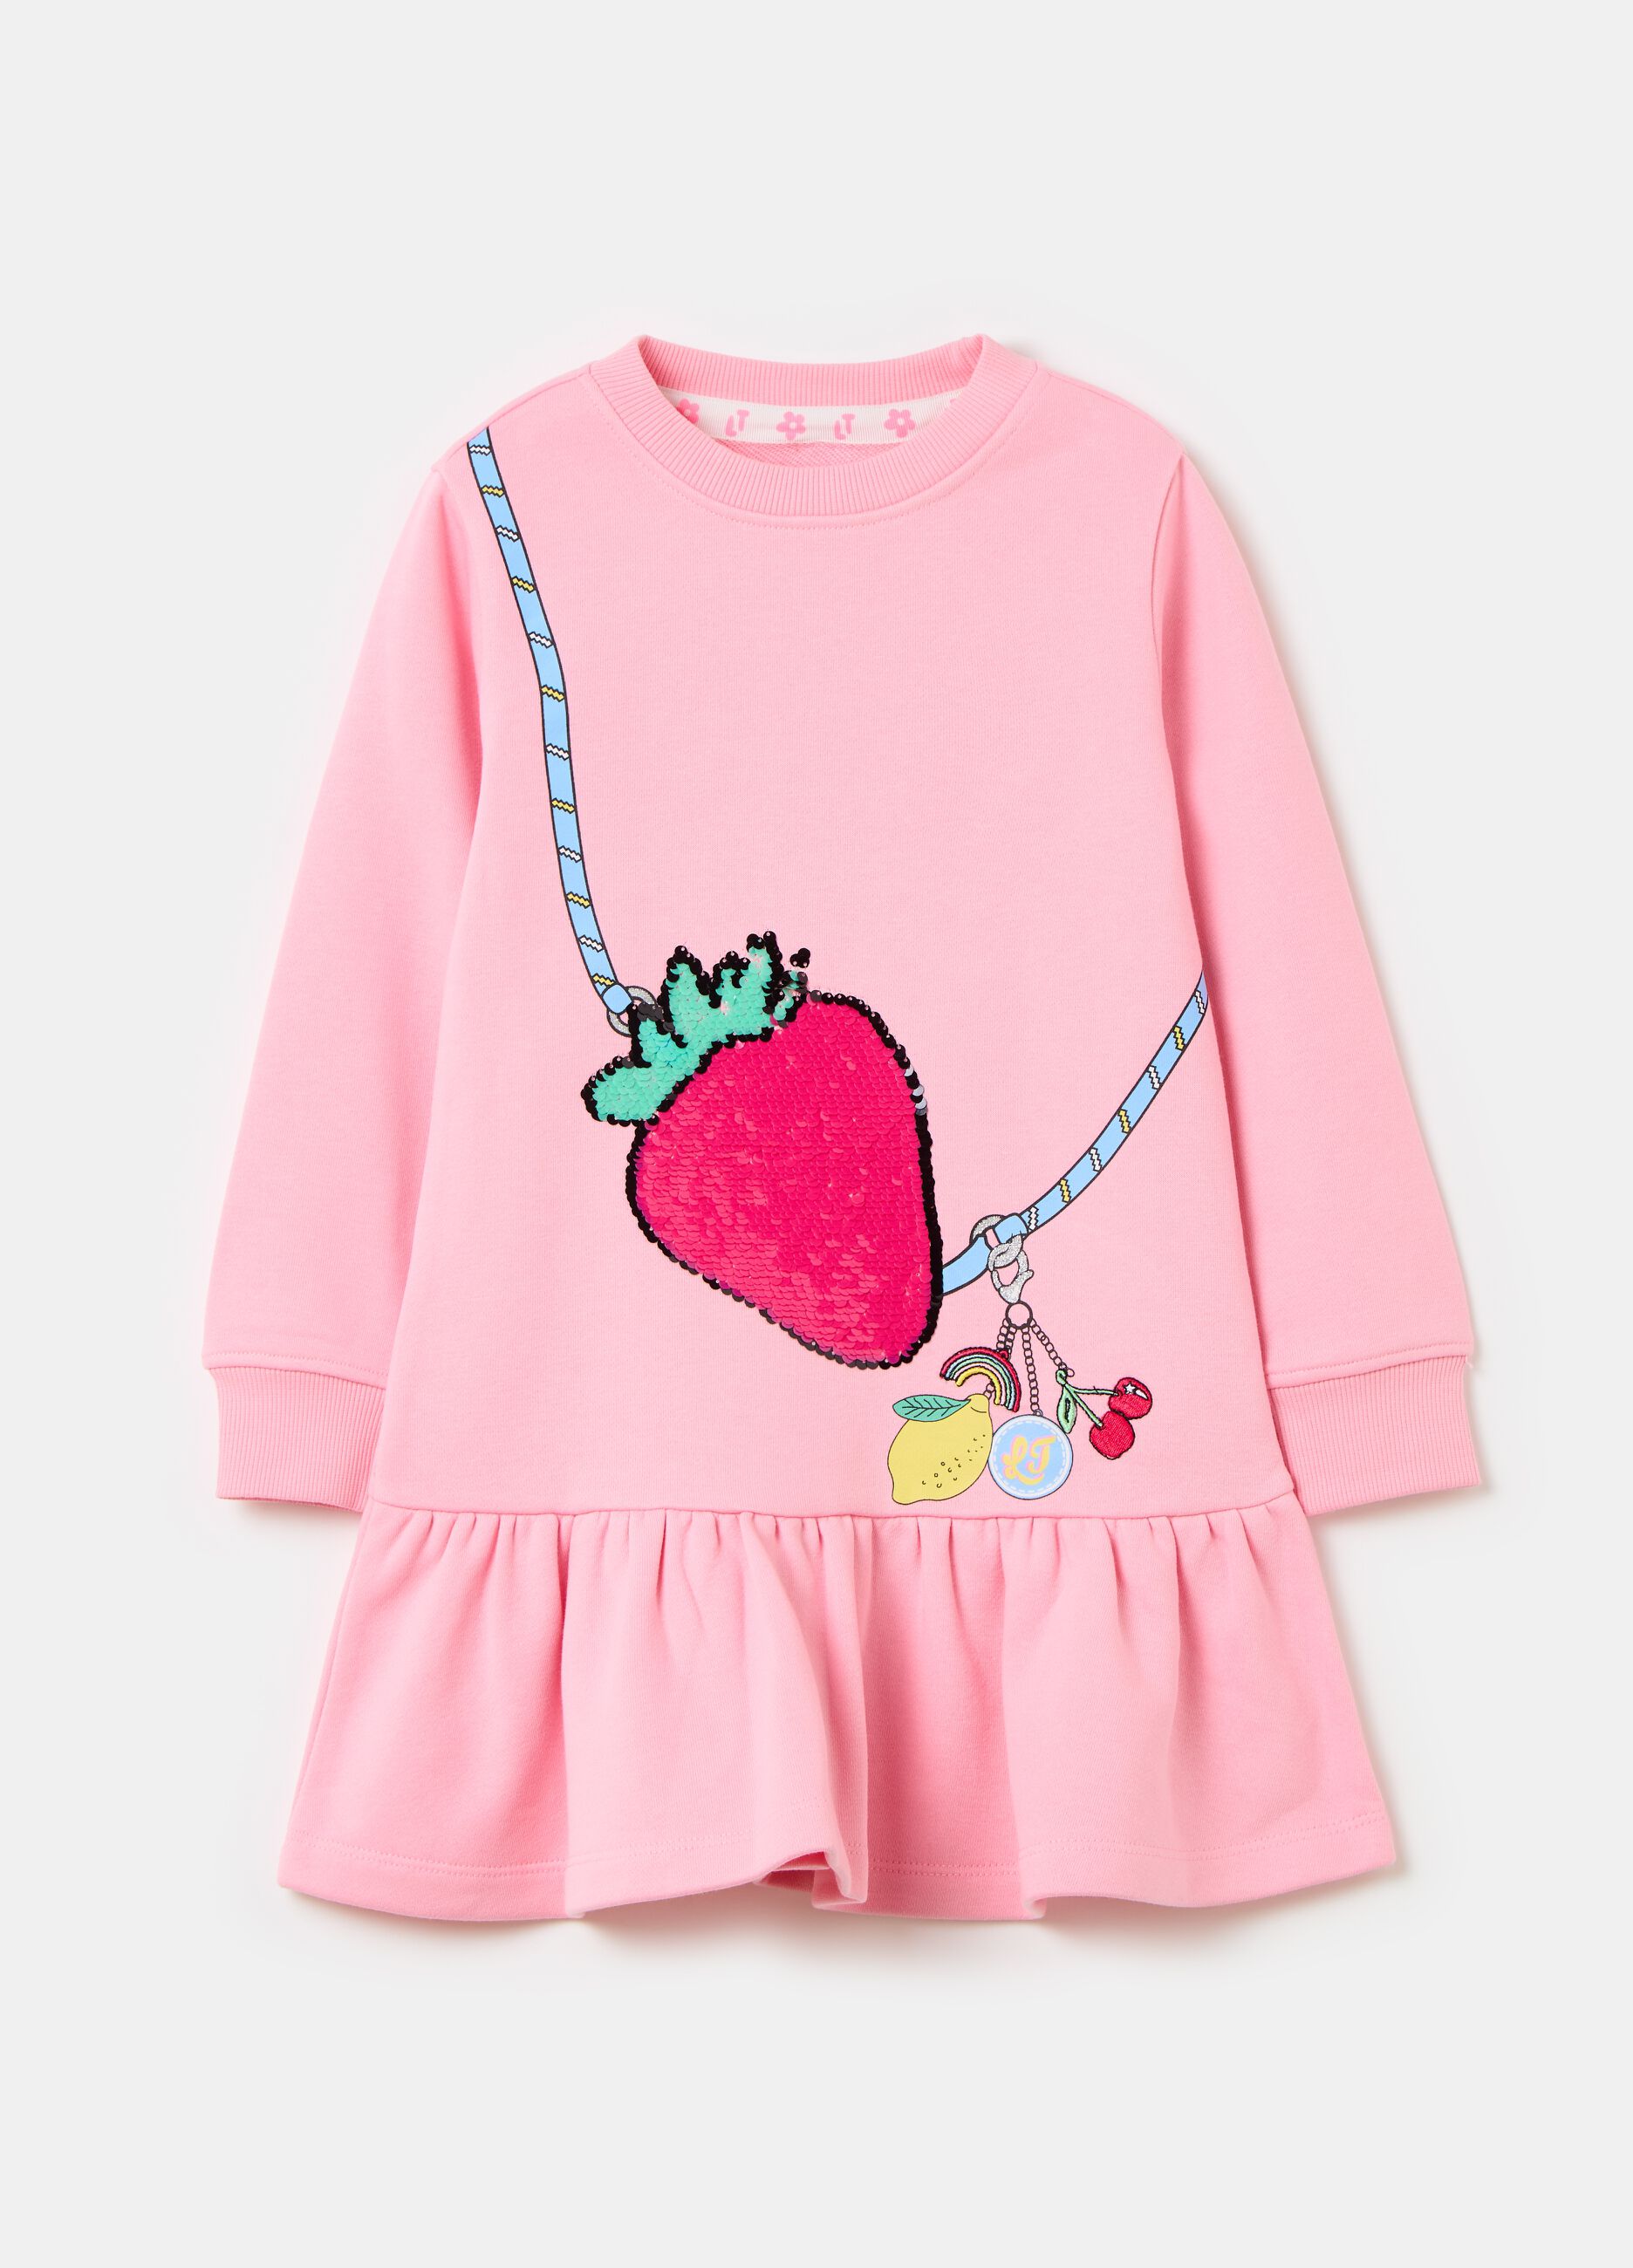 Sweatshirt dress with strawberry print and sequins